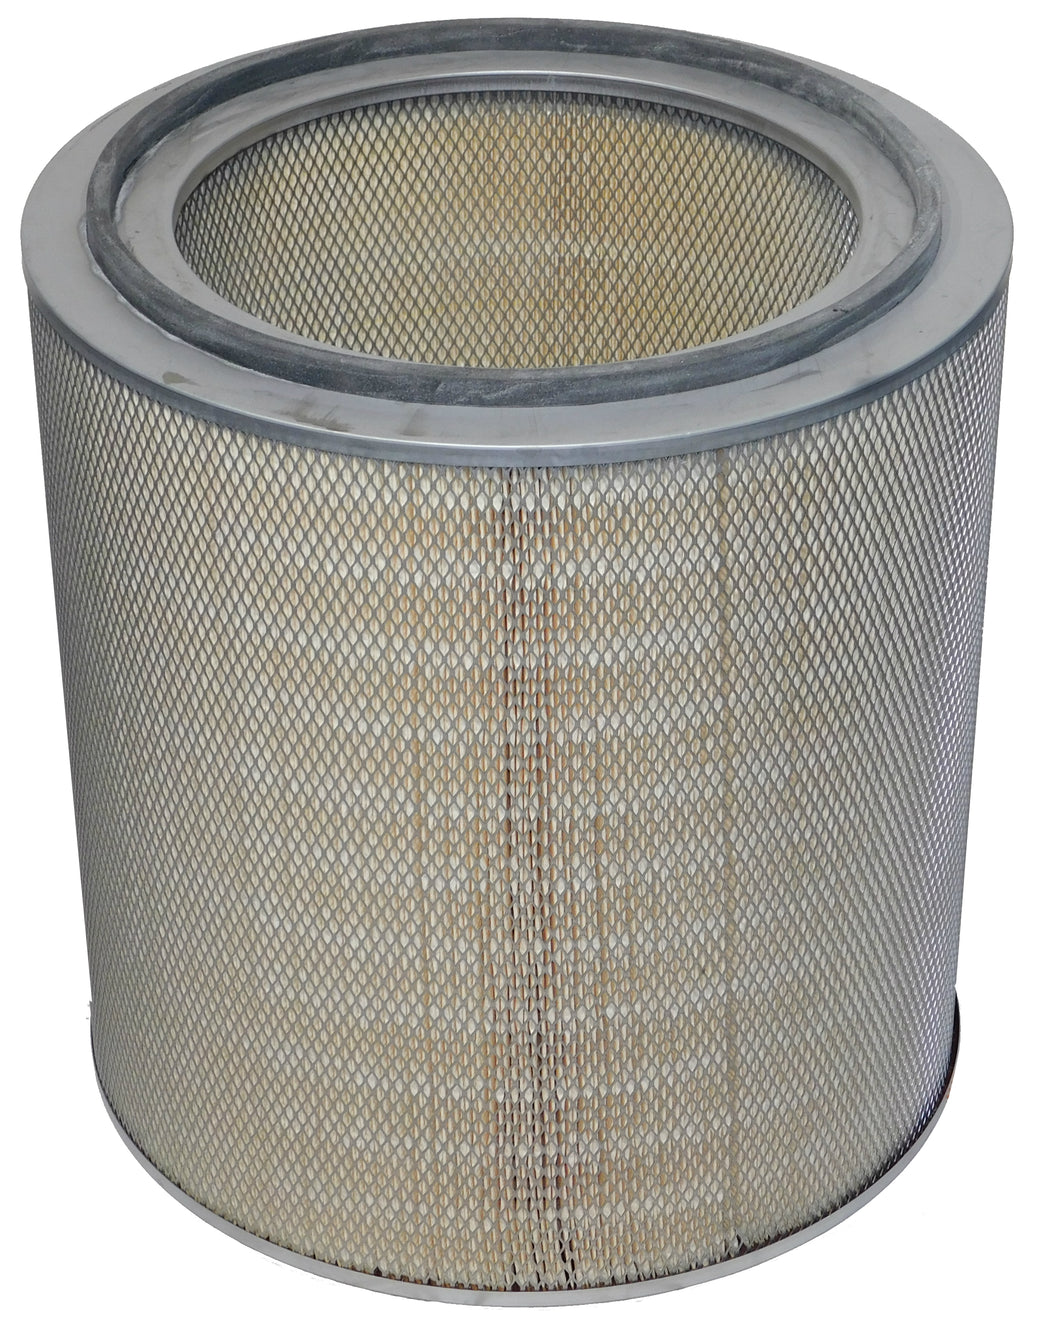 G82-7152 - Guardian - OEM Replacement Filter